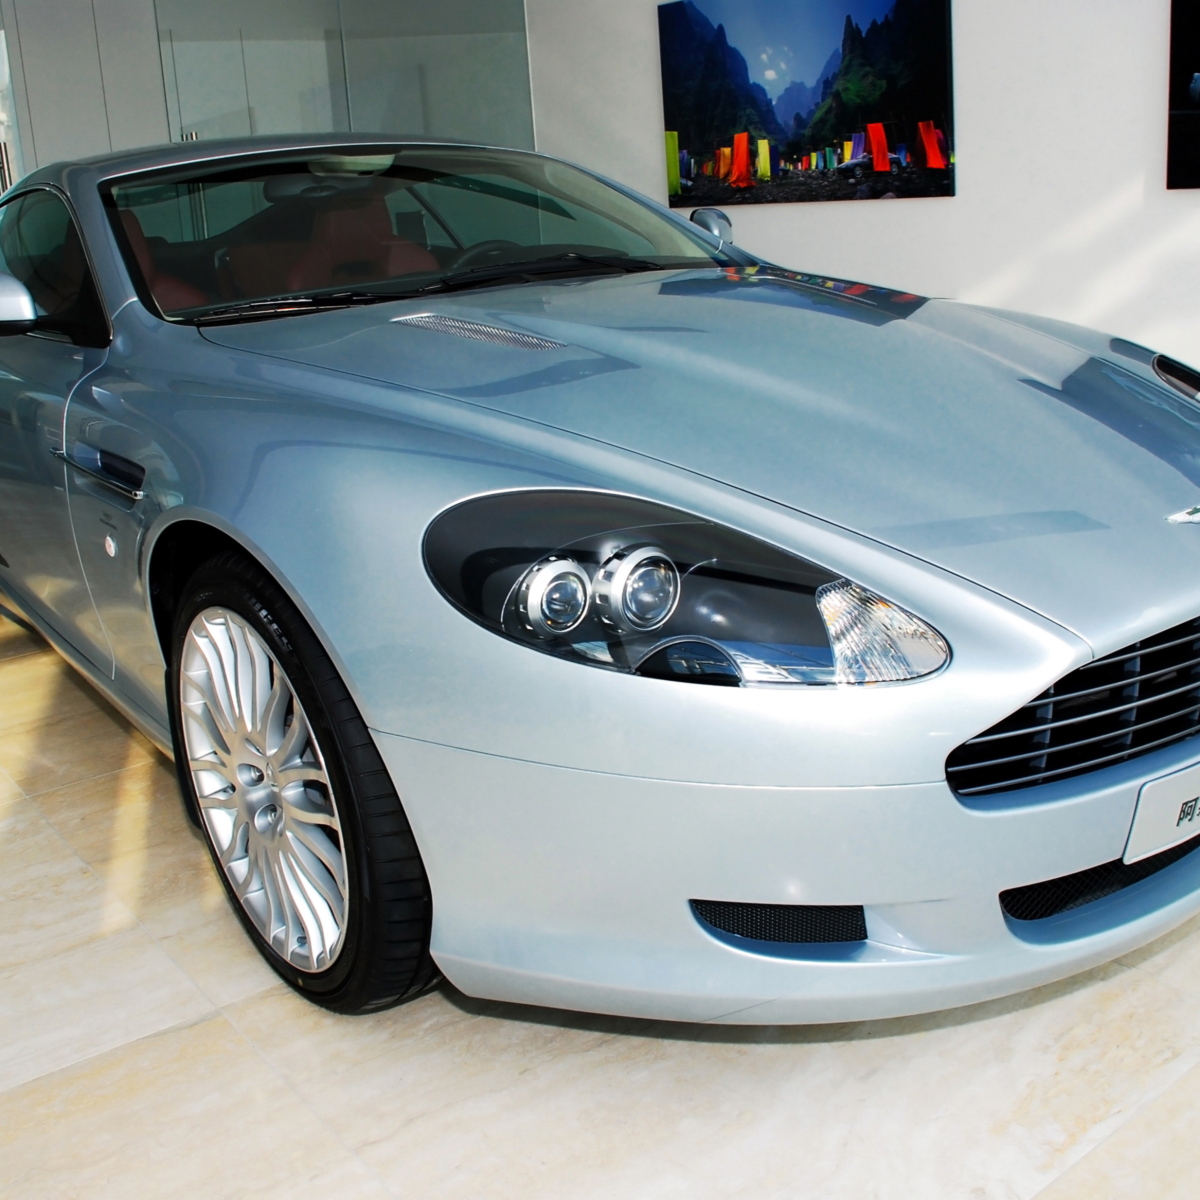 You can now rent an Aston Martin DB9 from Enterprise | Mashable